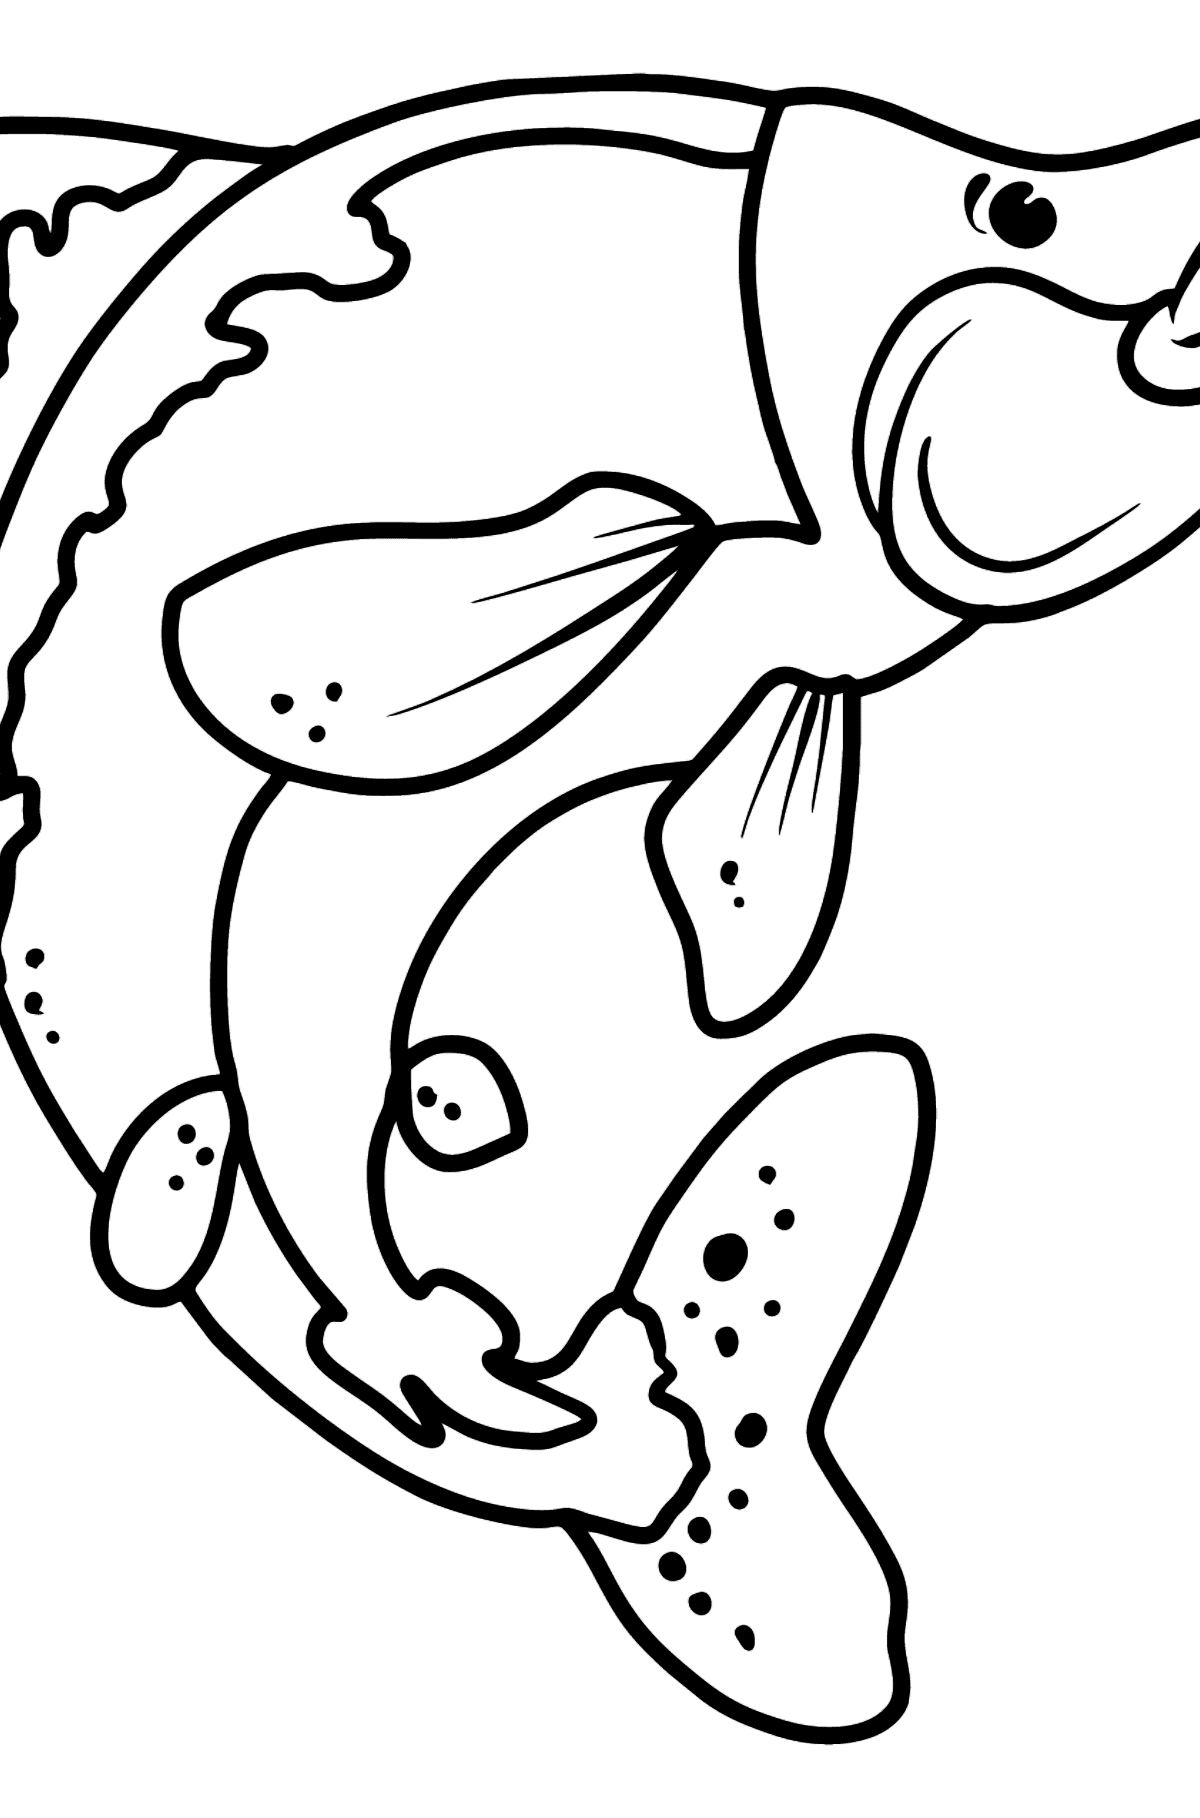 Salmon coloring page - Coloring Pages for Kids